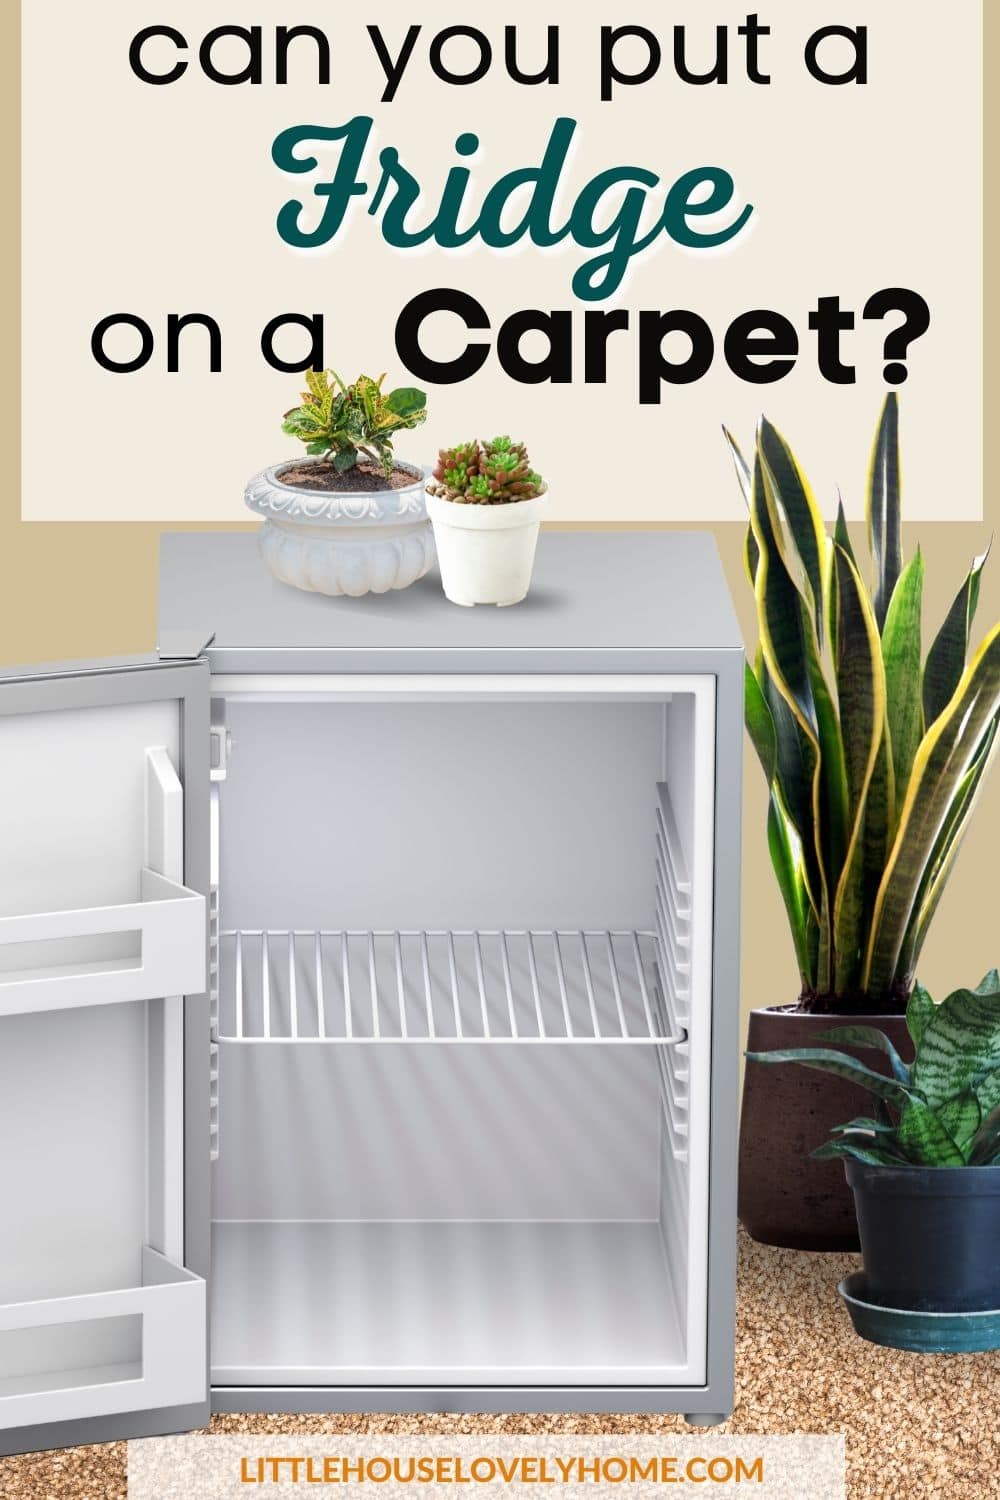 Photo showing a small fridge, potted plants on floor and on top of the fridge, a carpeted floor and text overlay that reads Can You Put a Fridge on Carpet 